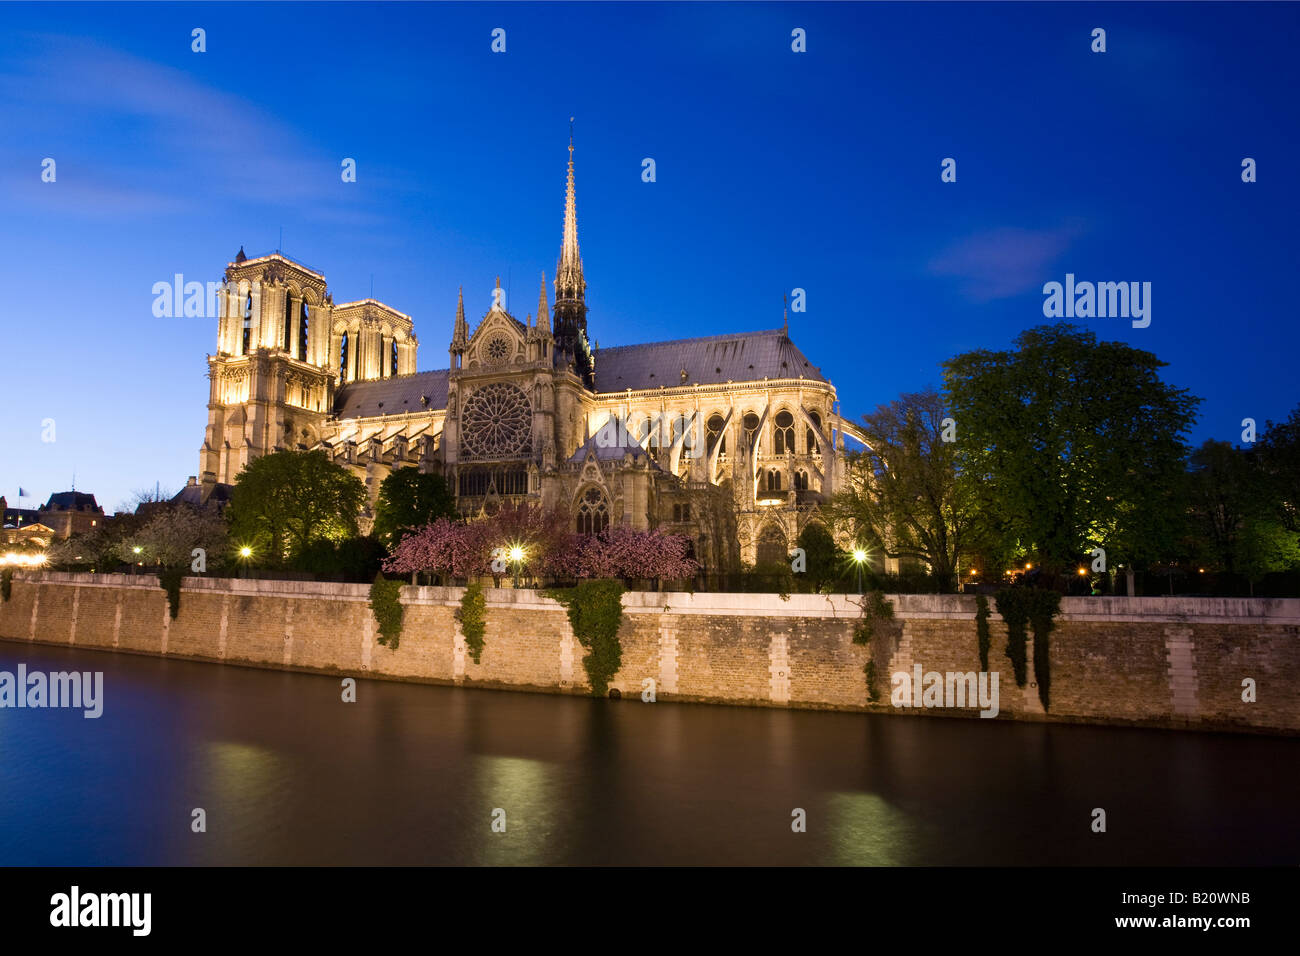 Notre Dame Cathedral floodlit illuminated illuminations and River Seine in evening night light Paris France Europe EU Stock Photo